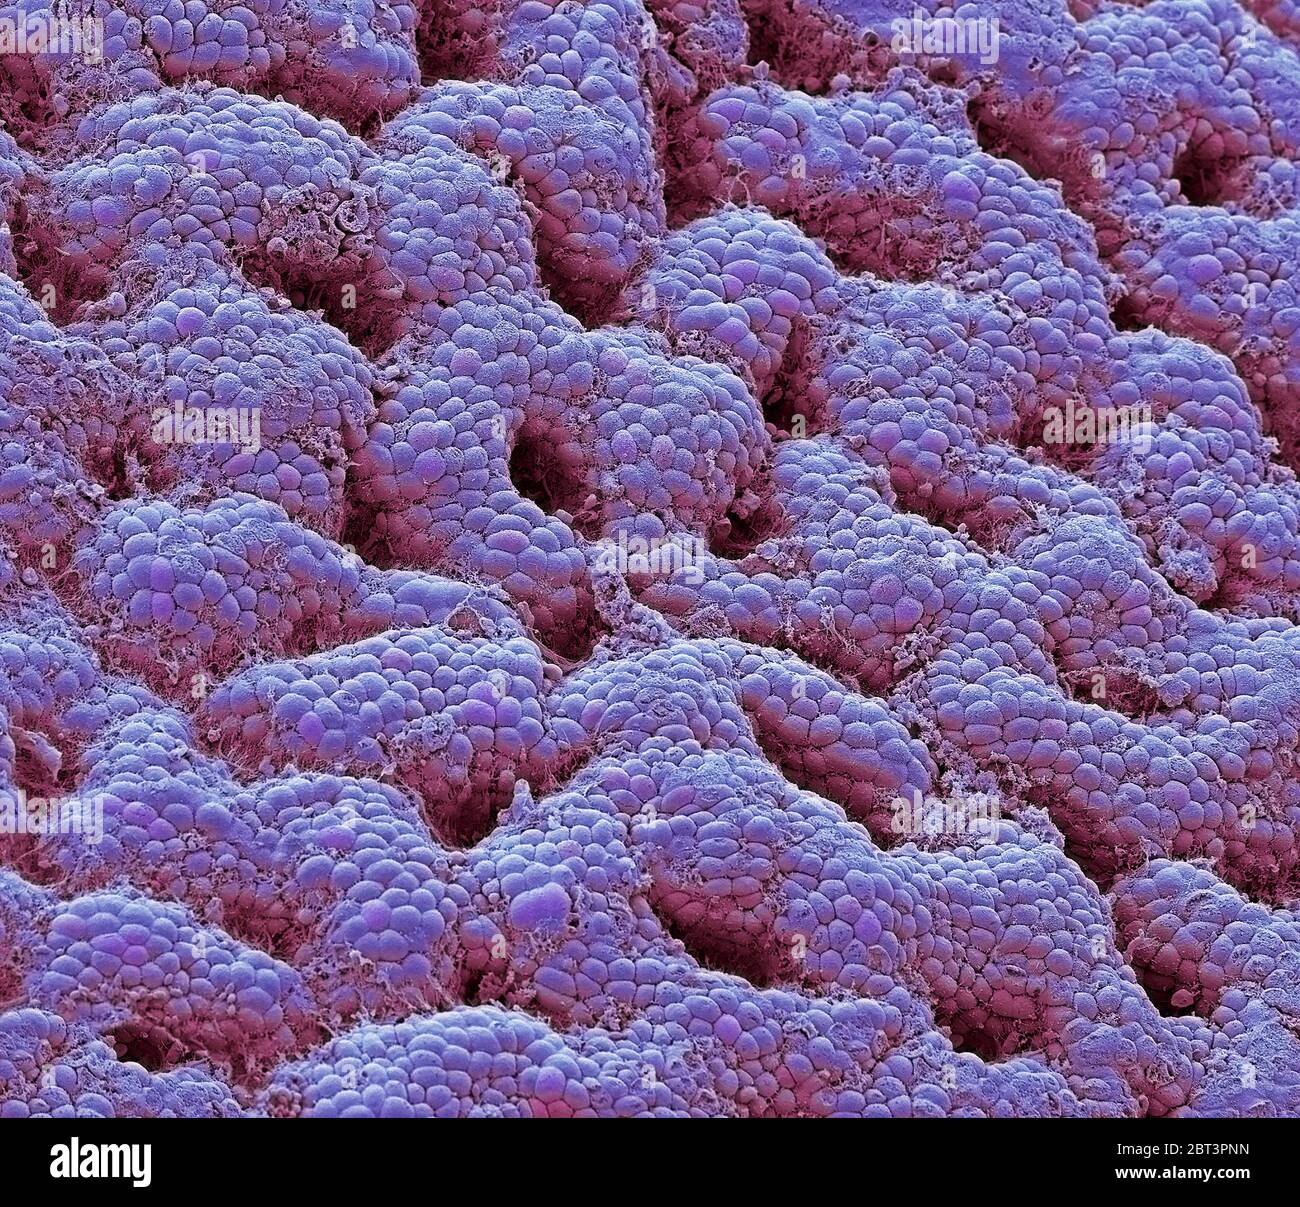 Stomach lining. Coloured scanning electron micrograph (SEM) of the glandular lining (mucosa) of the stomach. The gastric mucosa secretes the digestive Stock Photo